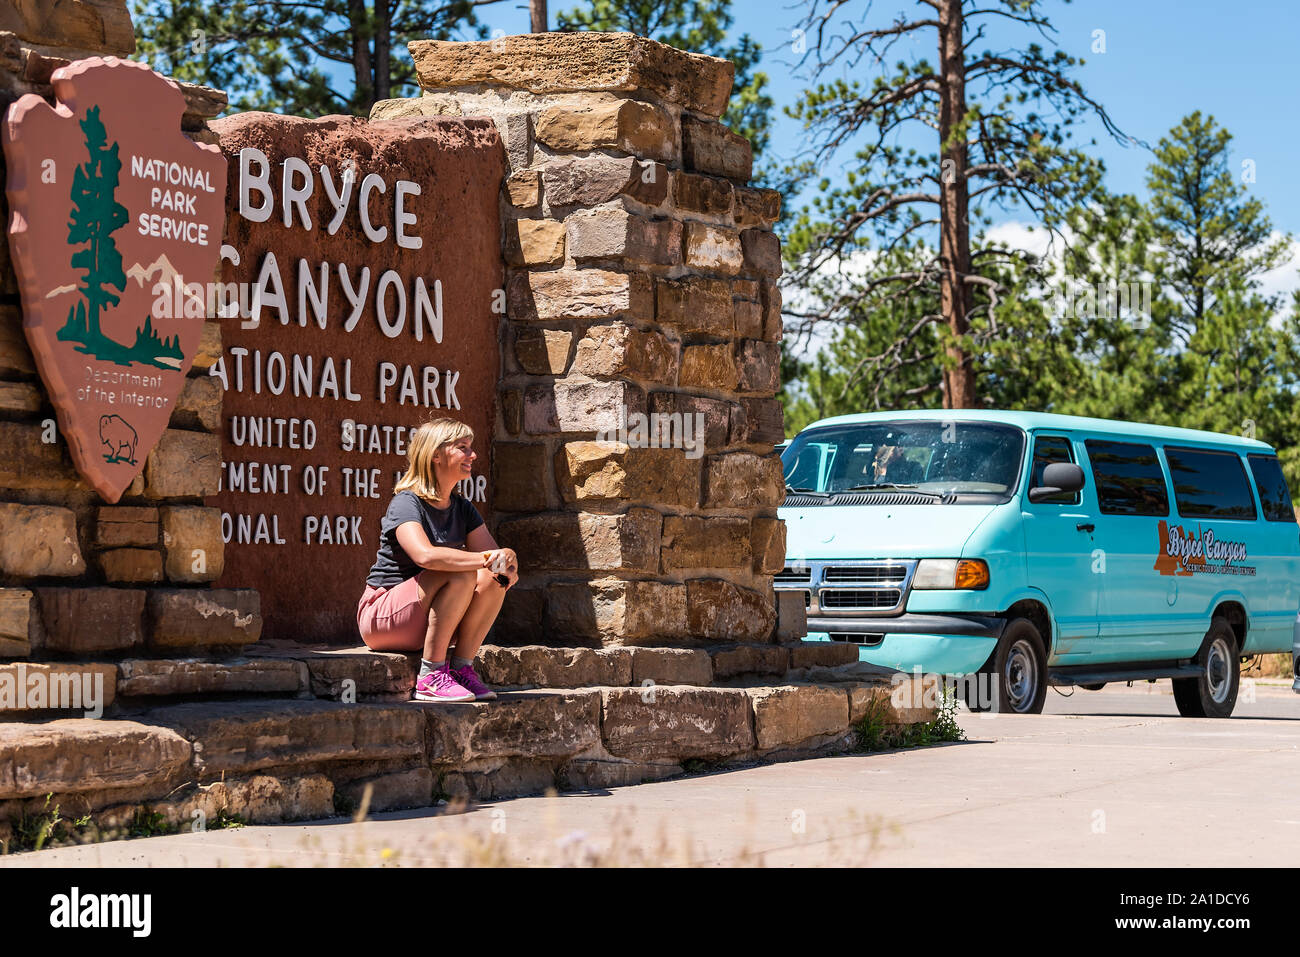 Bryce Canyon City, USA - August 1, 2019: Tourists taking pictures by national park entrance sign with woman posing for photo and tour bus Stock Photo